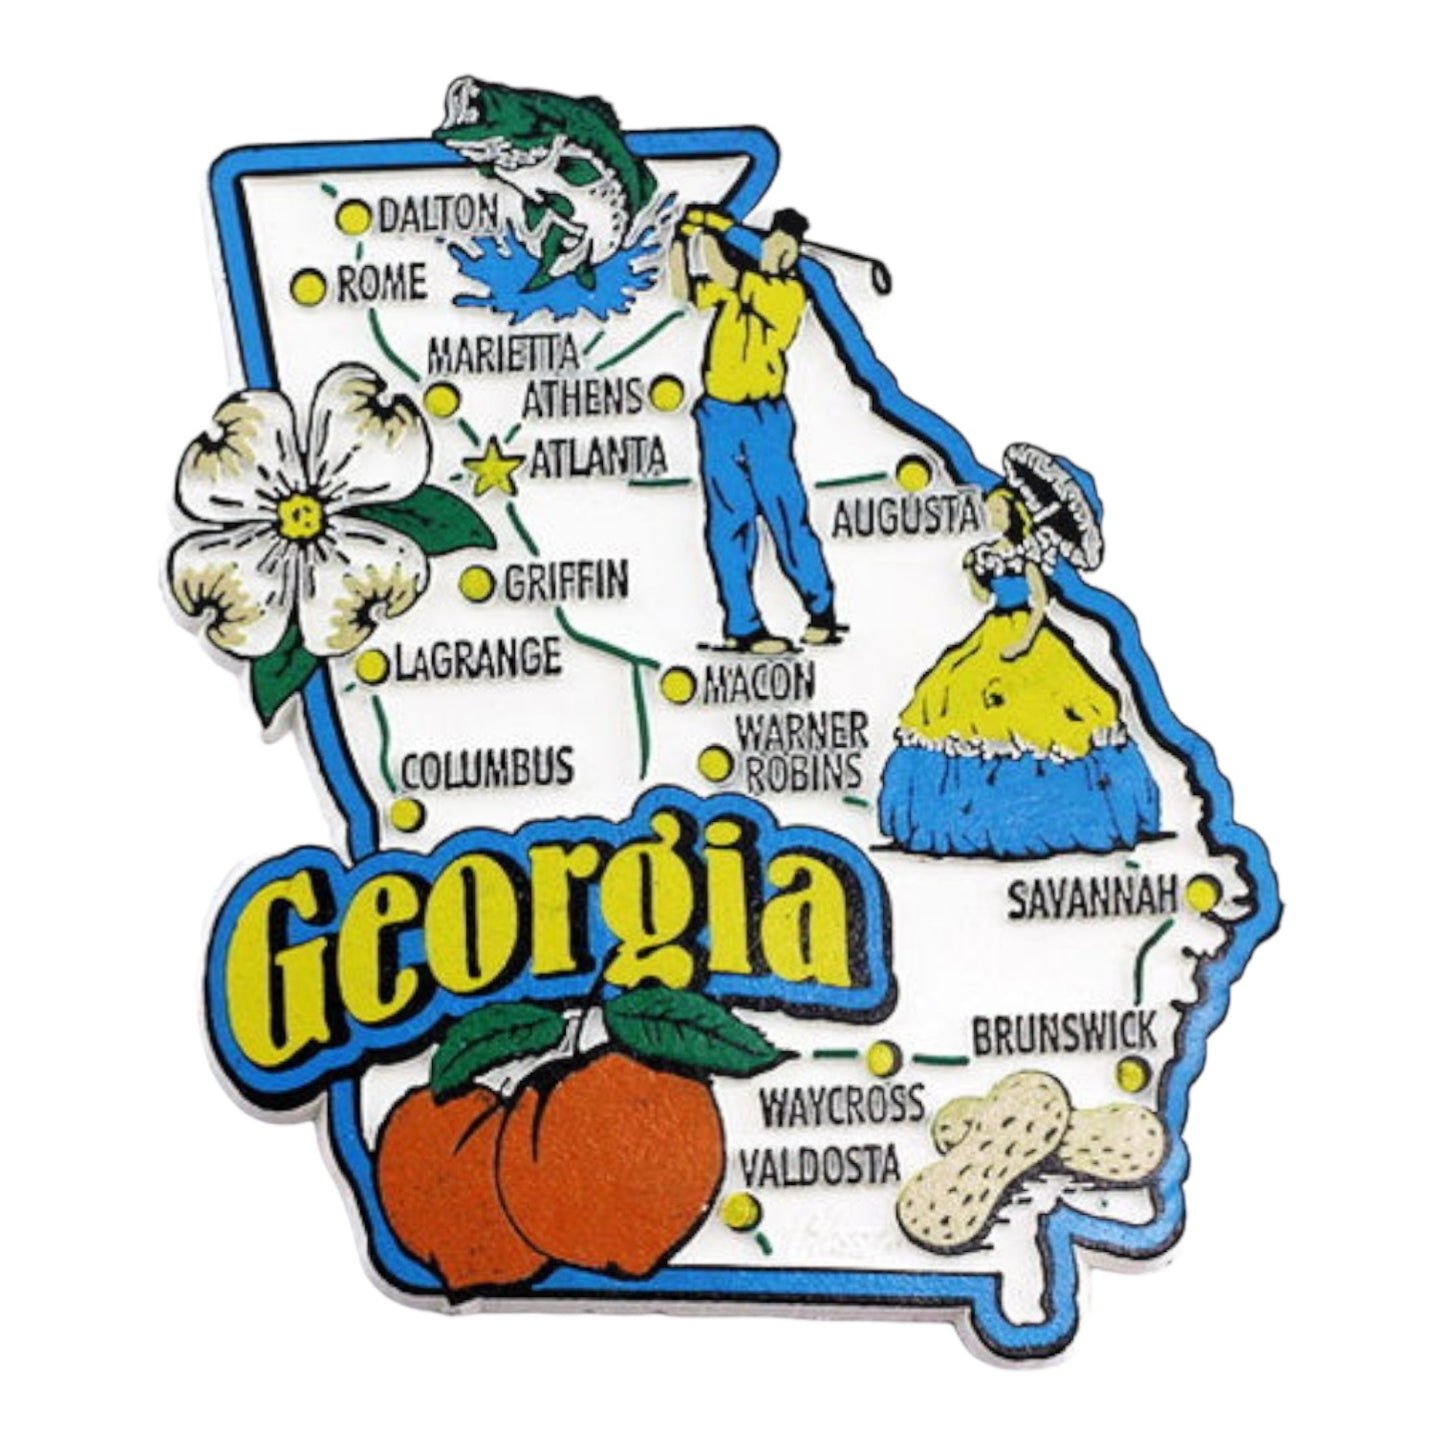 Georgia State Map and Landmarks Collage Fridge Collectible Souvenir Magnet